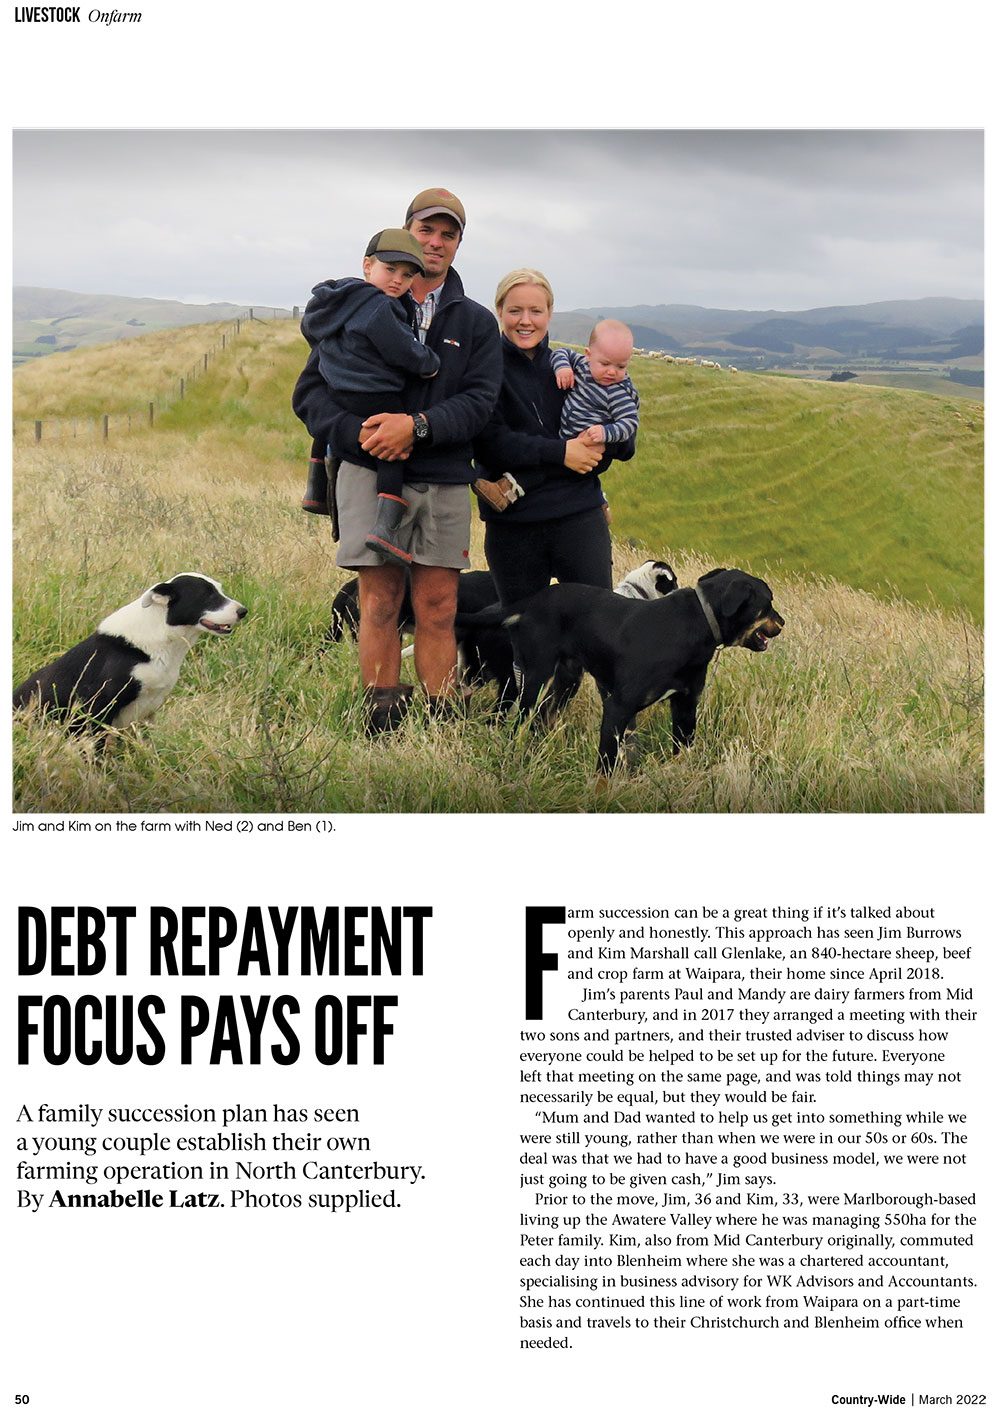 Debt repayment focus pays off | With Belles On